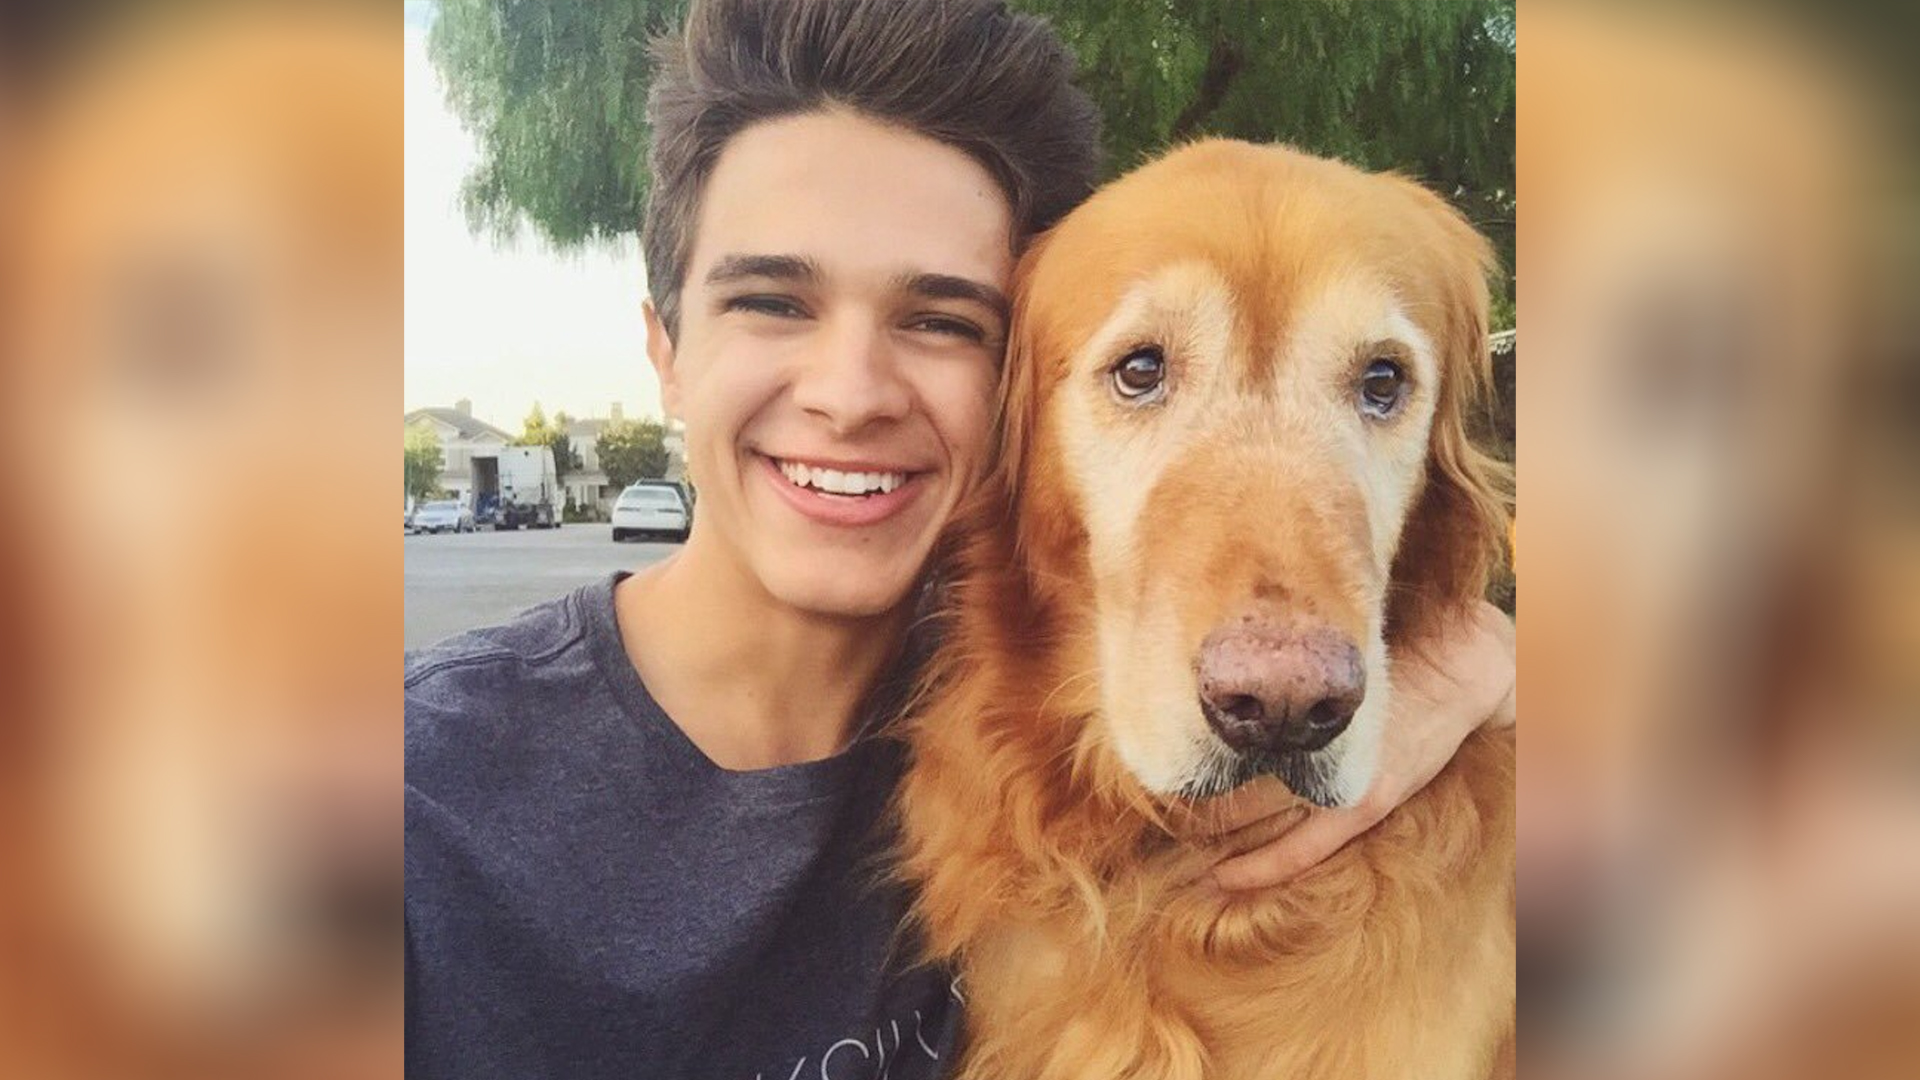 Brent with his dog